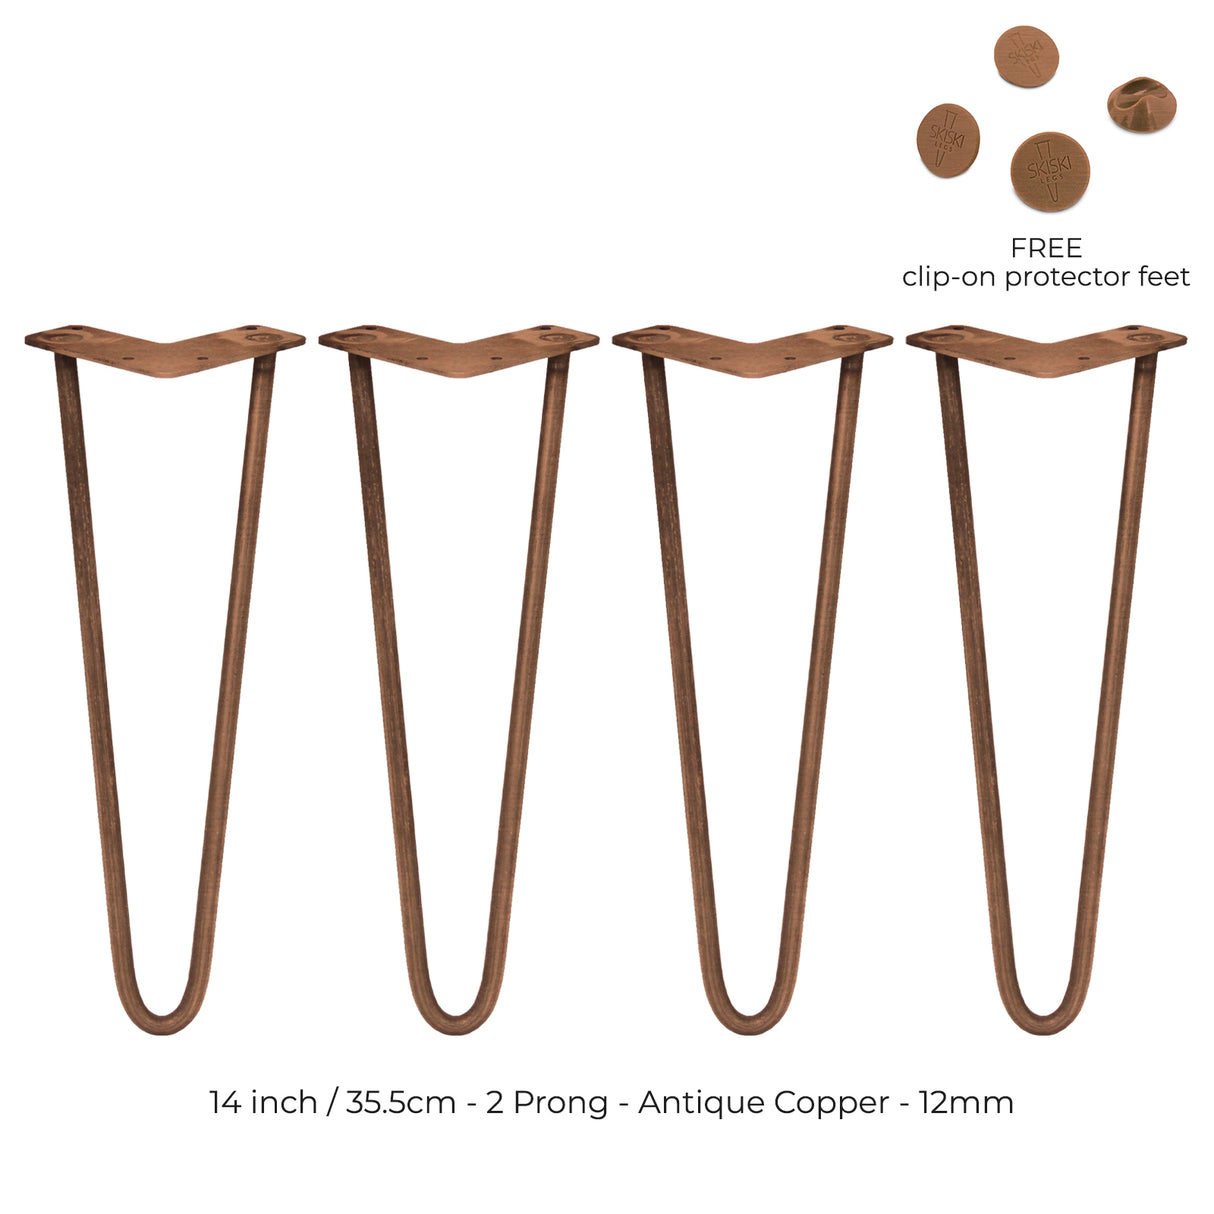 4 x 14" Hairpin Legs - 2 Prong - 12mm - Antique Copper